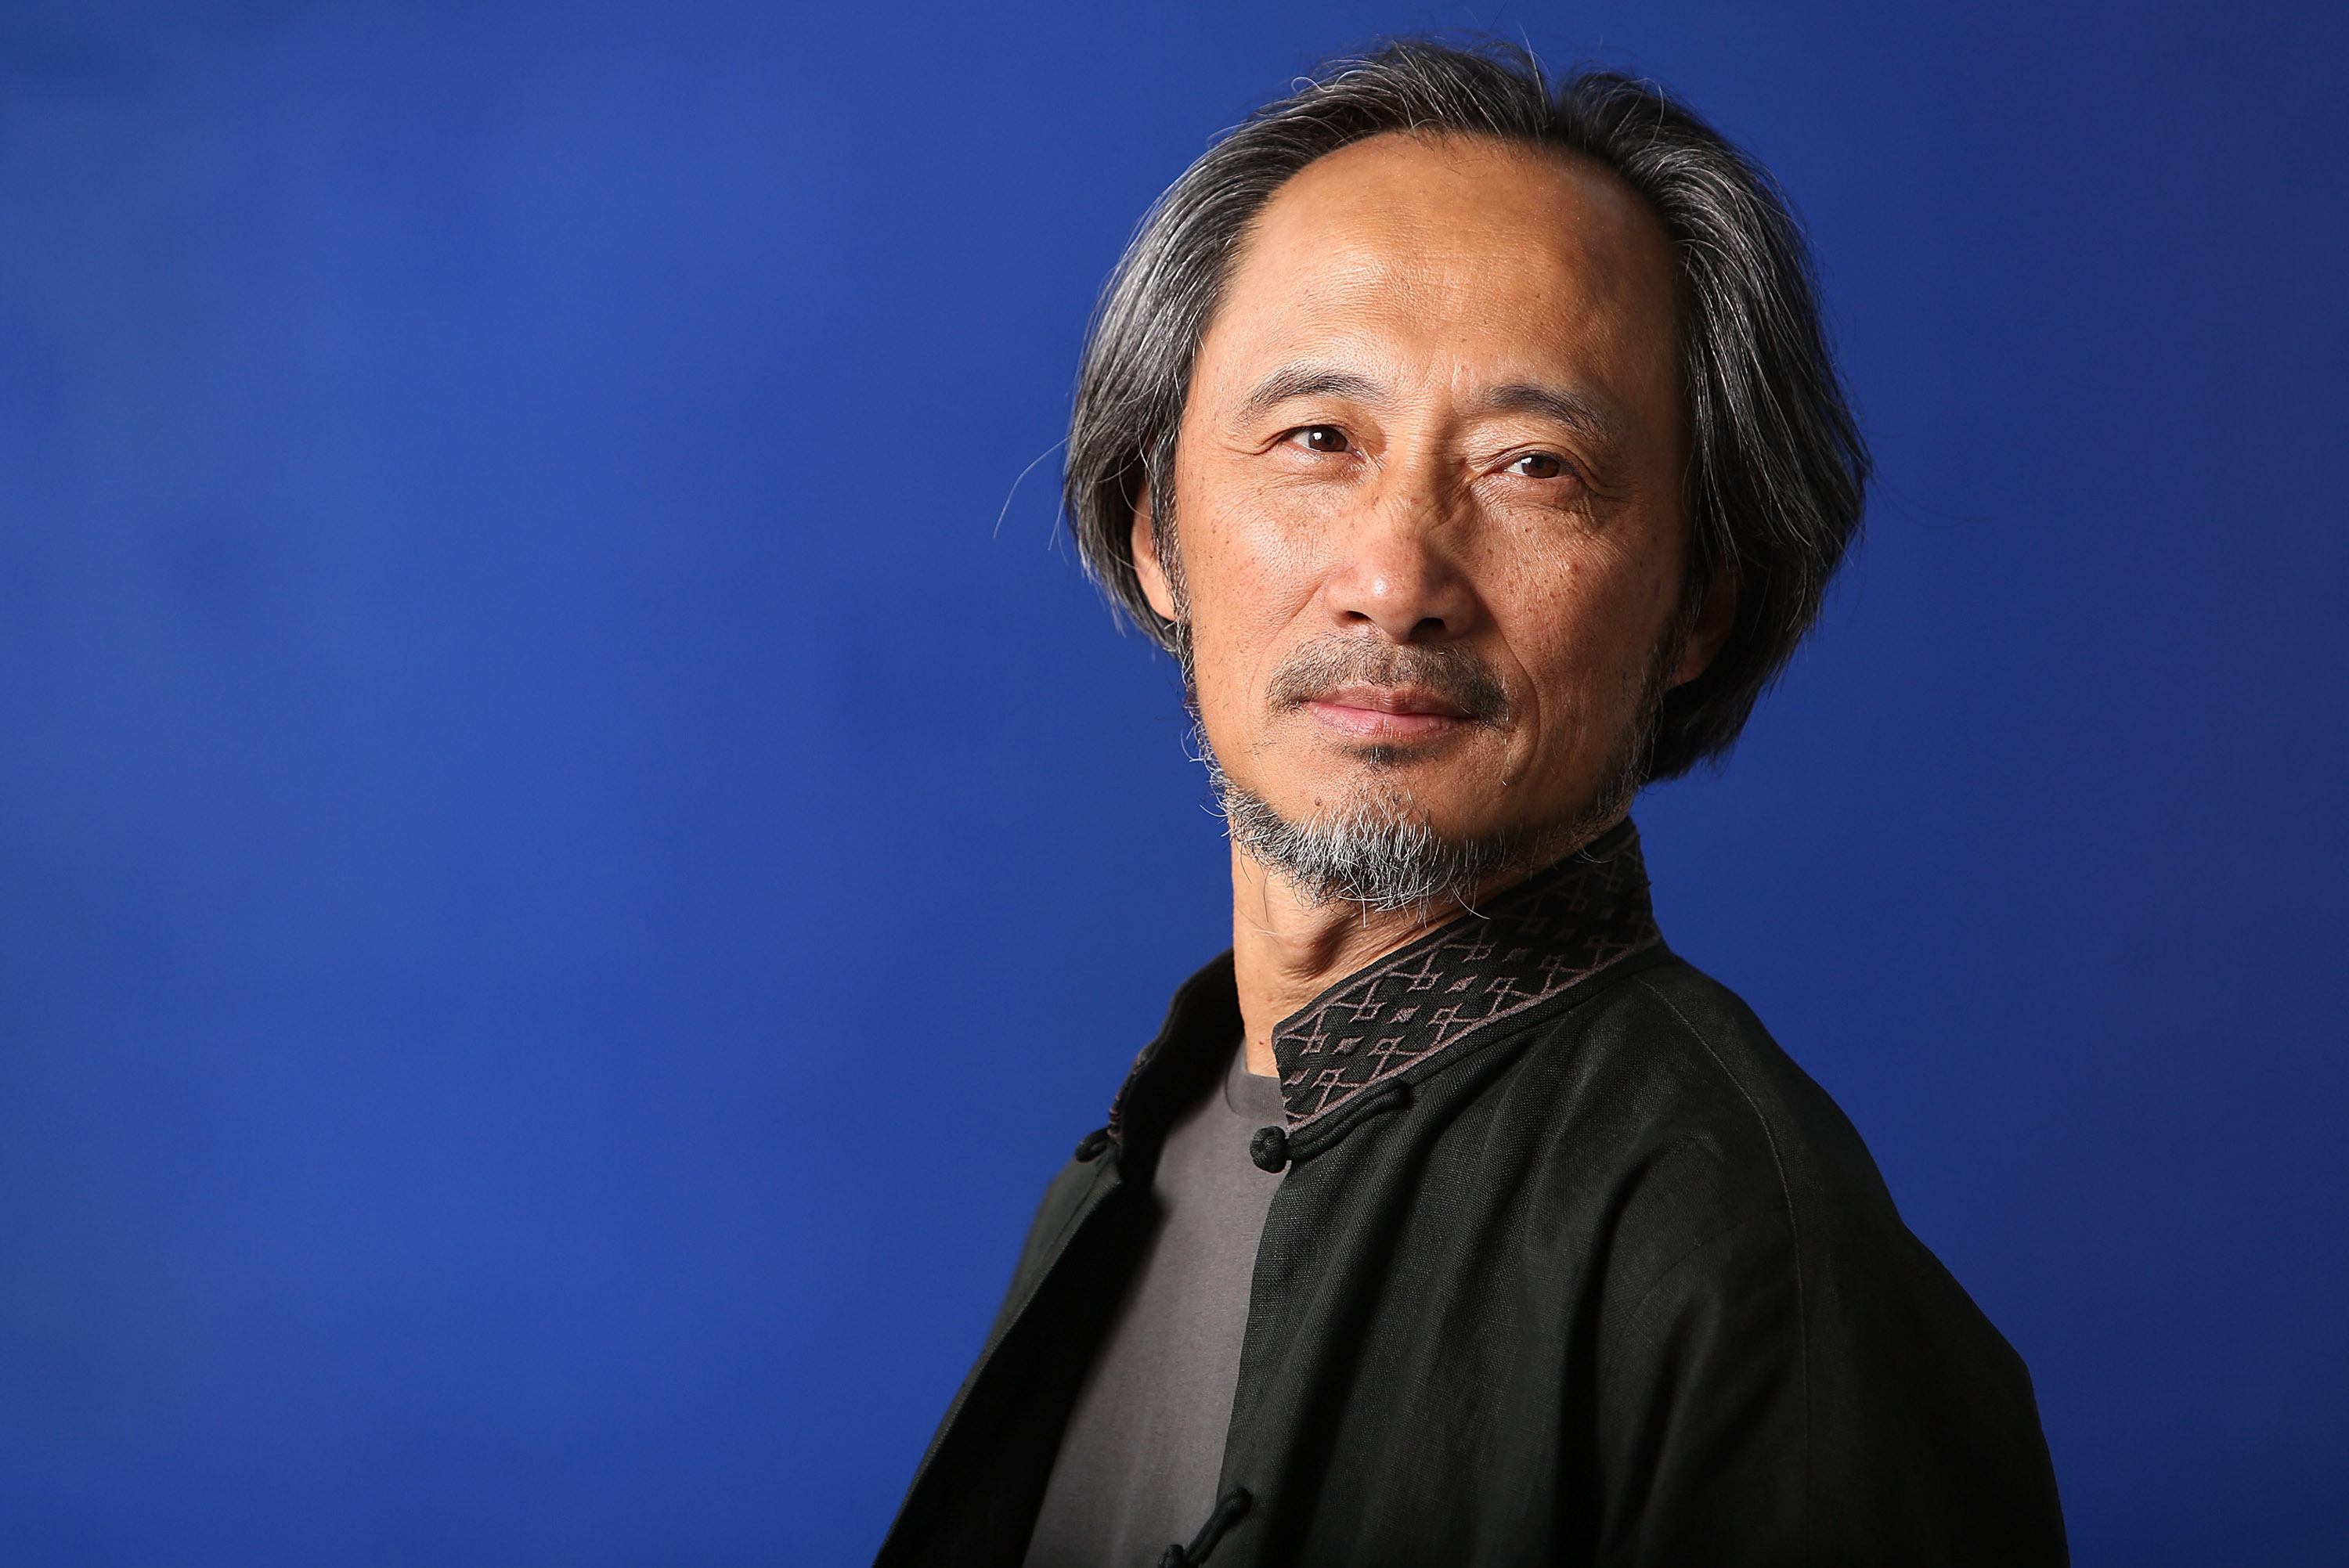 Ma Jian, Chinese-born author, and critic of the Chinese government, attends the 30th Edinburgh International Book Festival in Edinburgh, Scotland on on Aug. 12, 2013. (Jeremy Sutton-Hibbert—Getty Images)